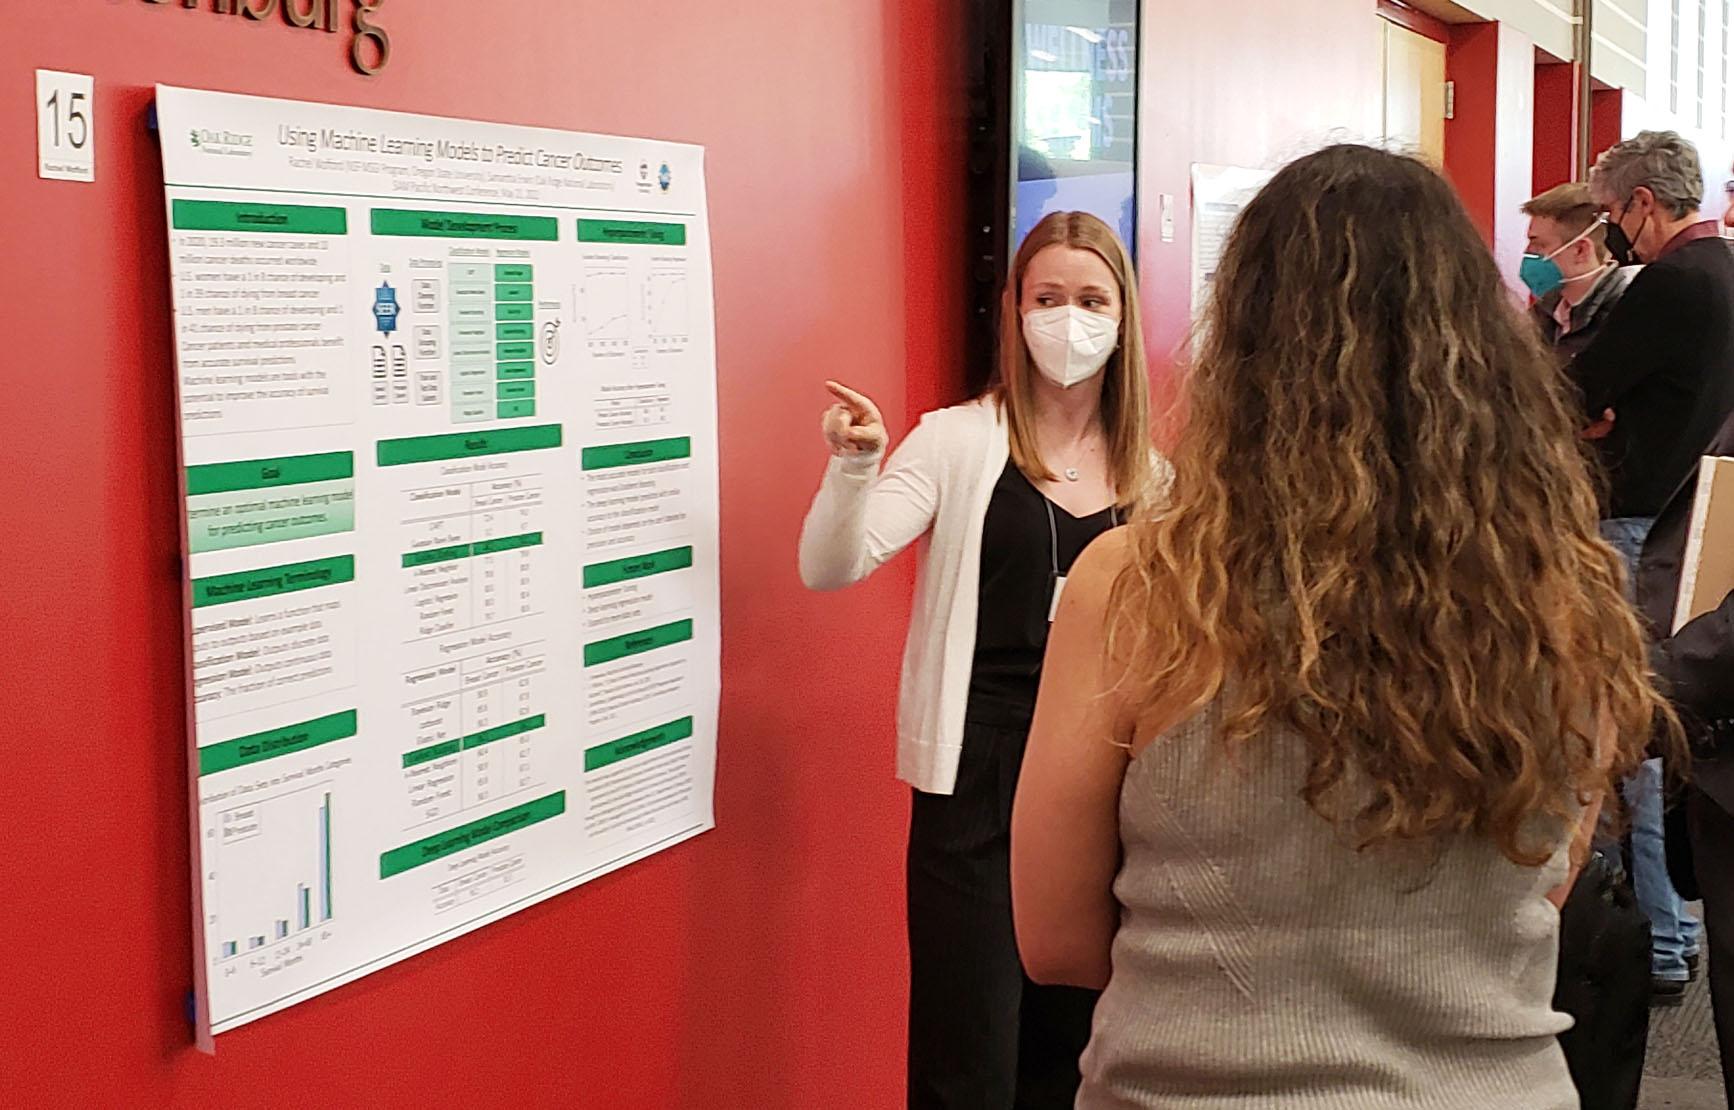 Rachel Wofford in front of her poster on Using Machine Learning Models to Predict Cancer Outcomes at the SIAM PNW Section Meeting at WSU Vancouver, May 2022